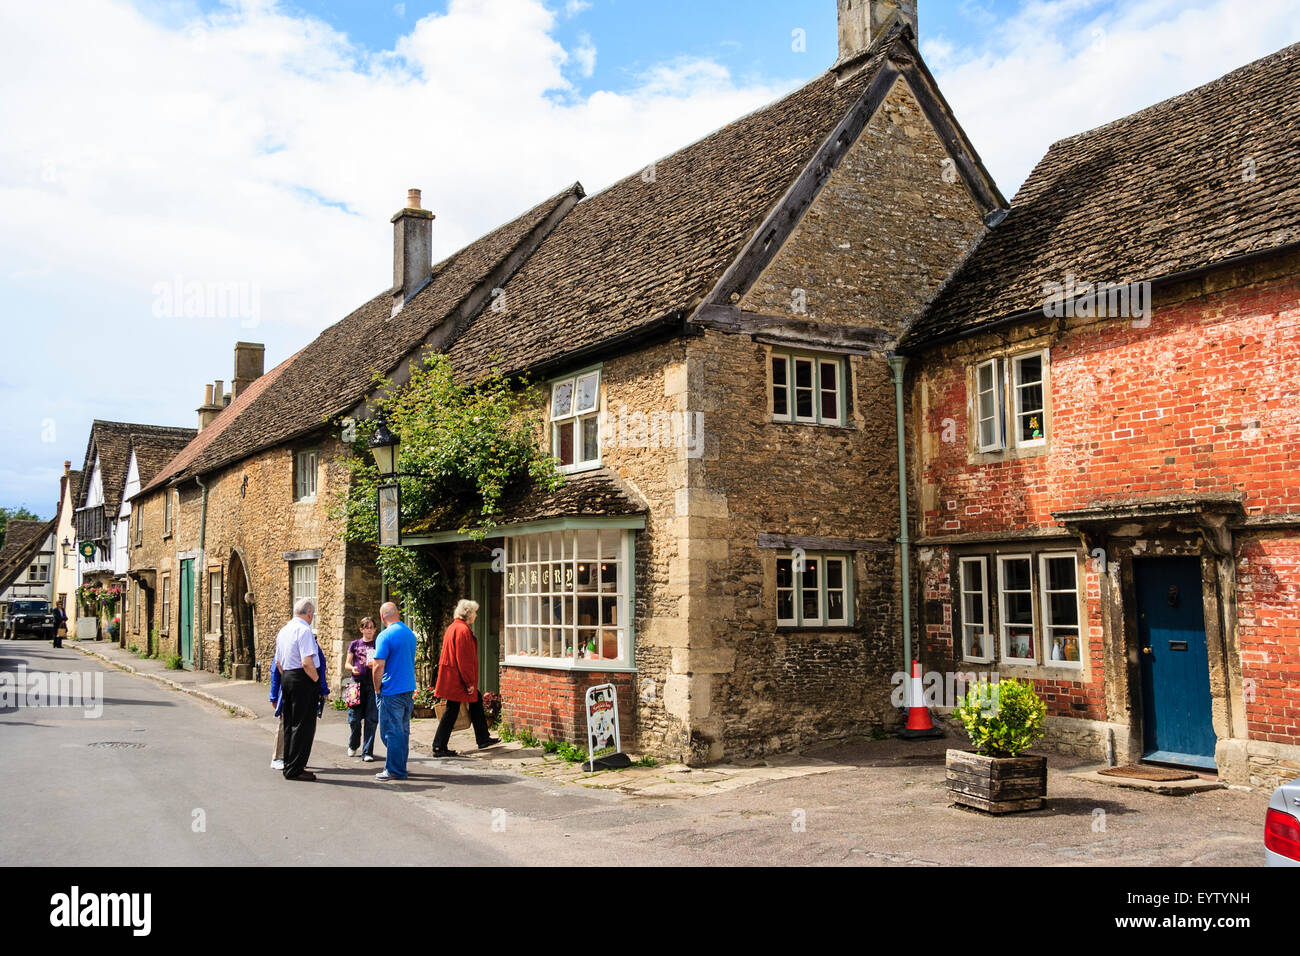 England, Lacock, Cotswolds. Church Street, 15th century - 18th century Cotswold stone houses and village bakery. People in street, sunshine. Stock Photo